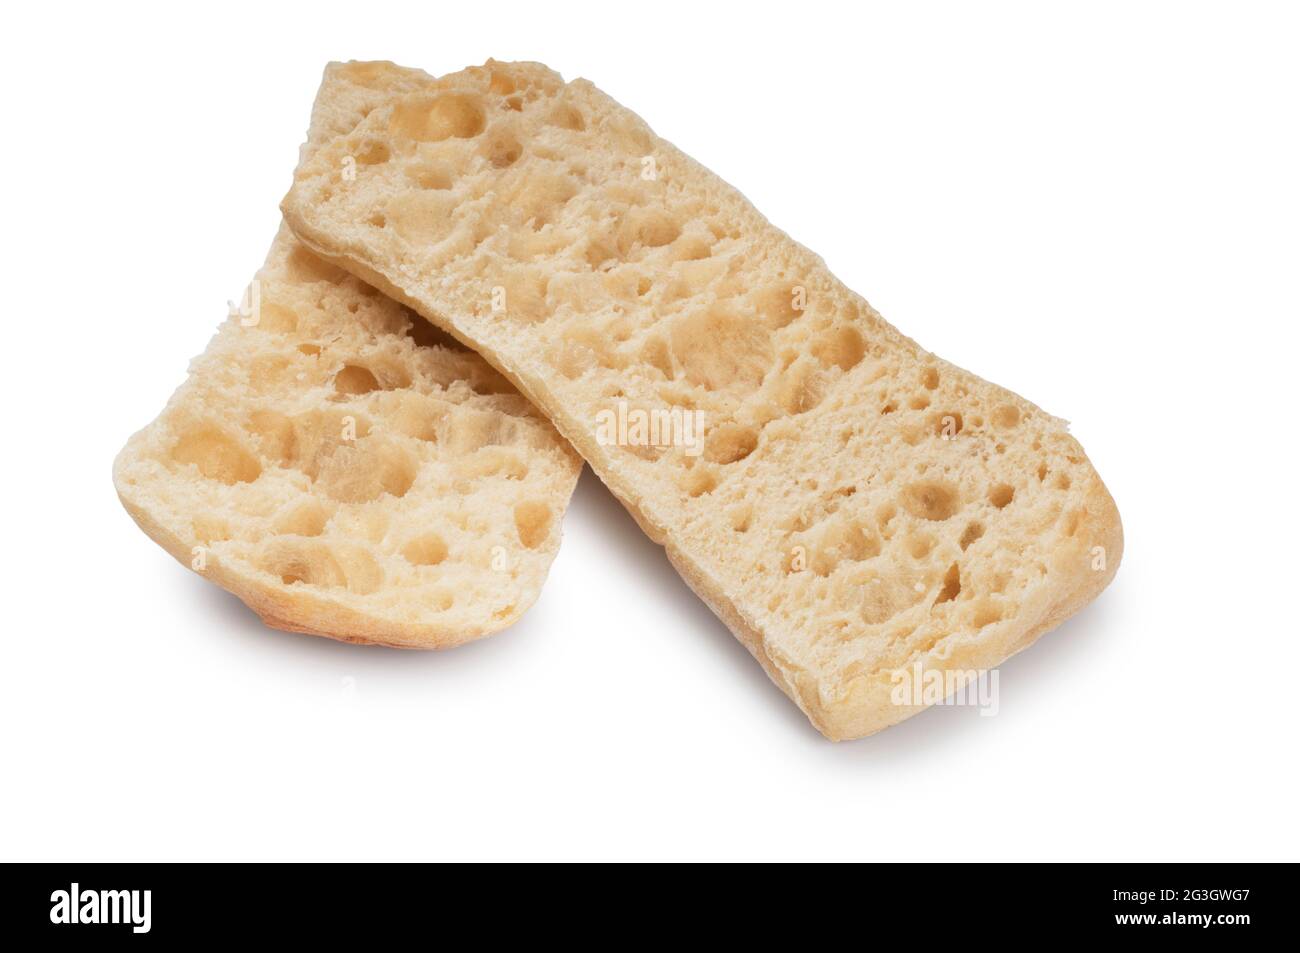 Studio shot of panini rolls cut out against a white background - John Gollop Stock Photo